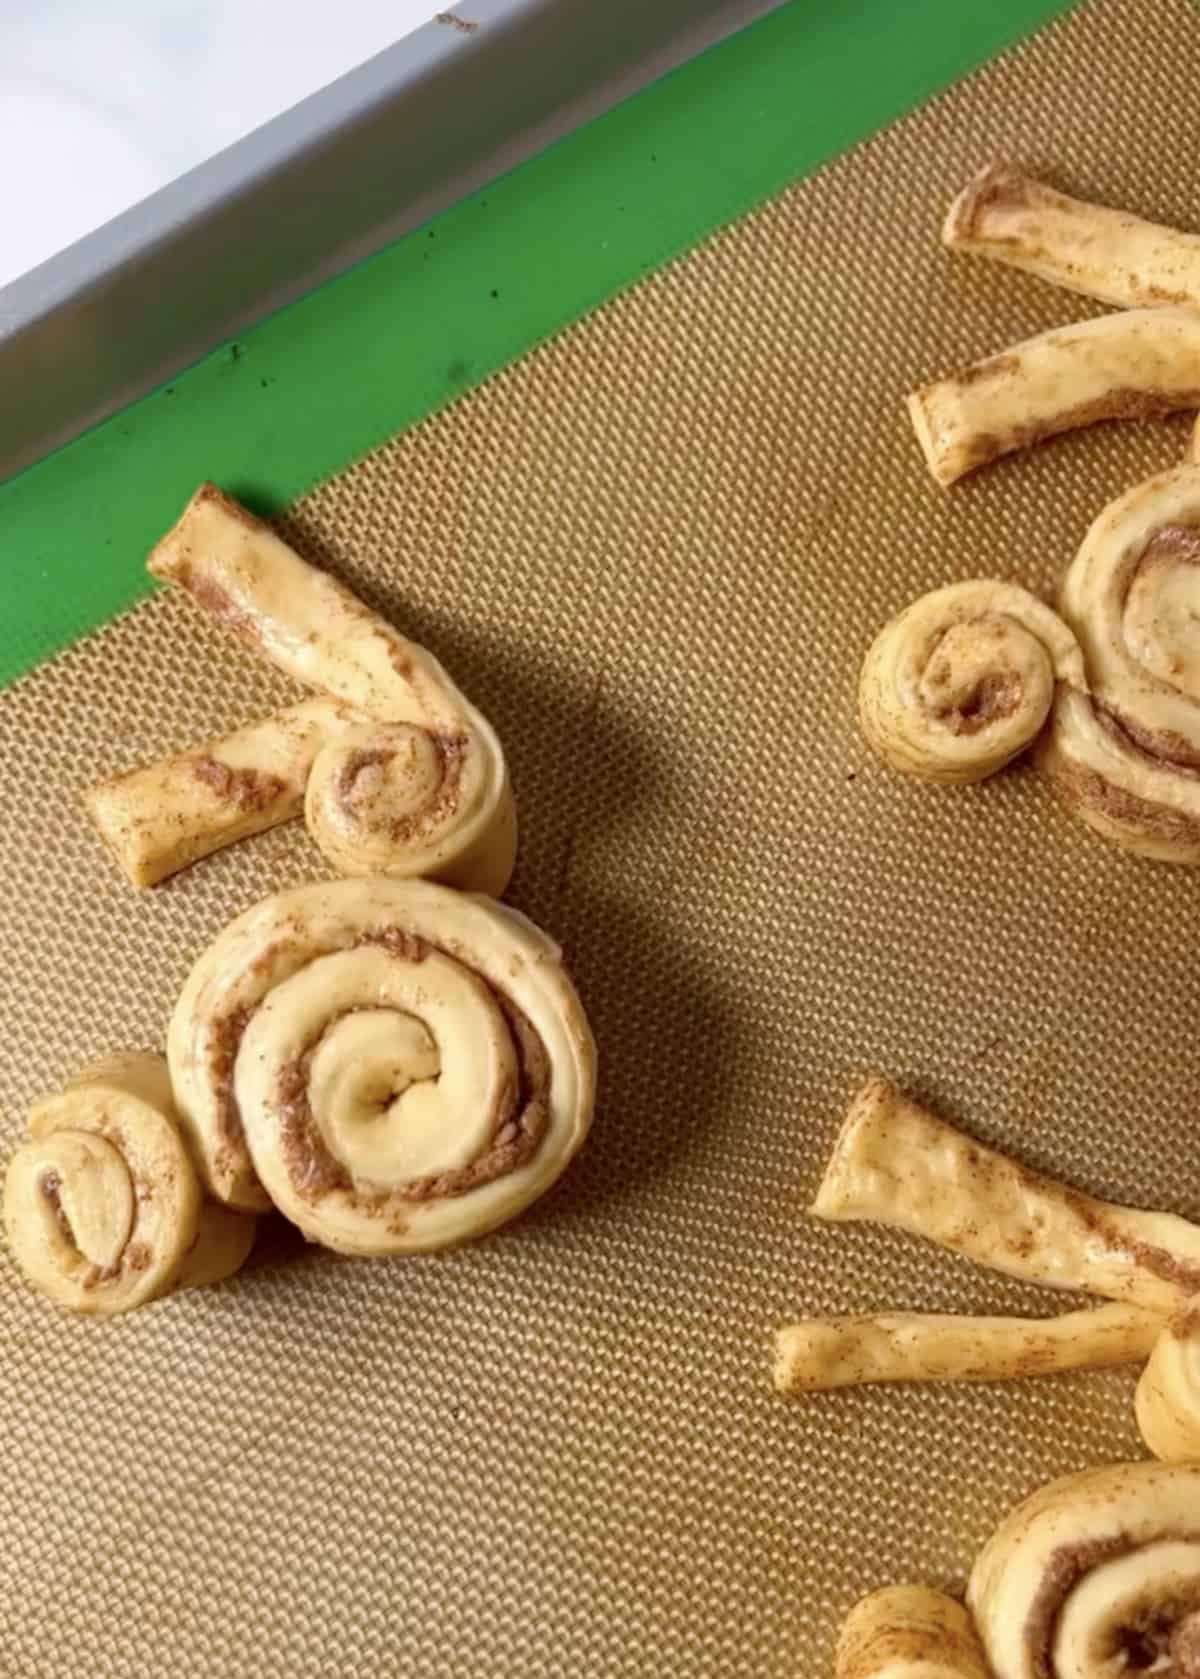 Baking sheet with bunny rolls.